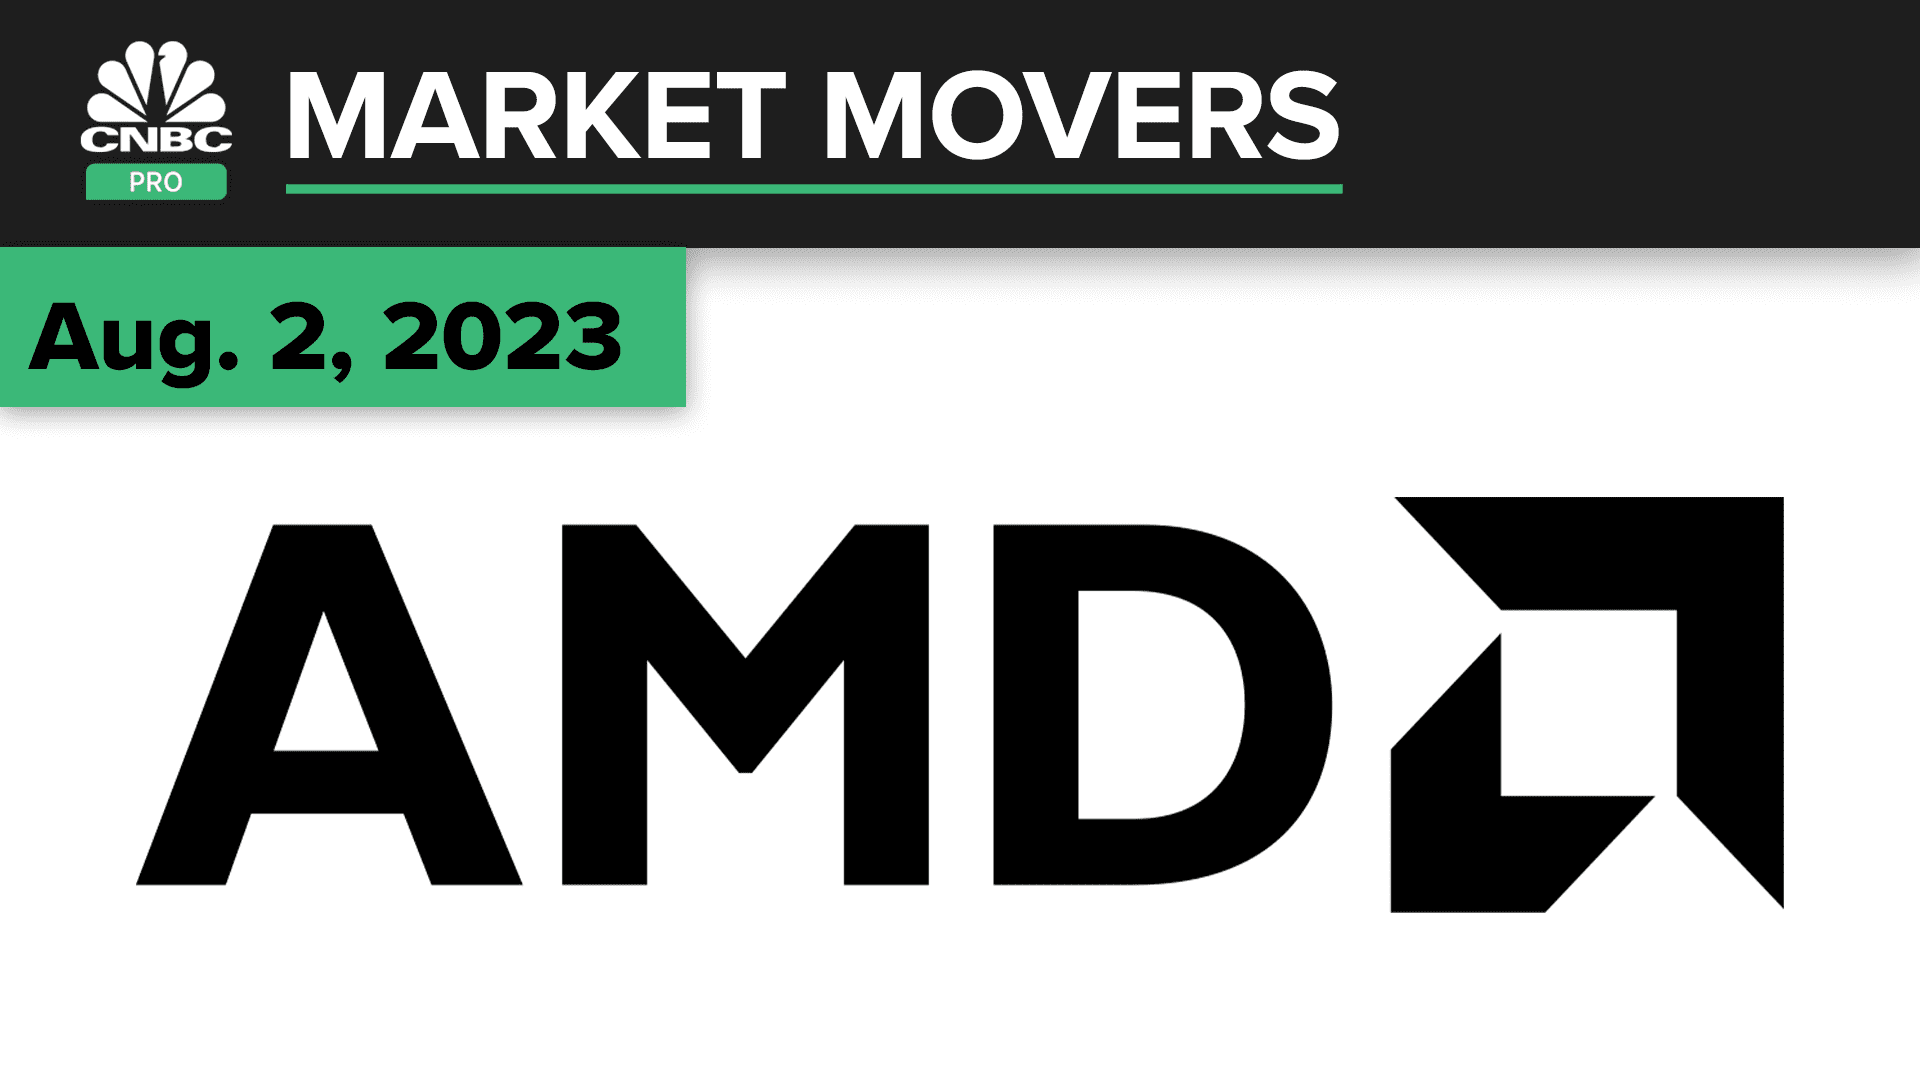 AMD drops despite topping estimates in latest quarter. Here's what the pros are saying